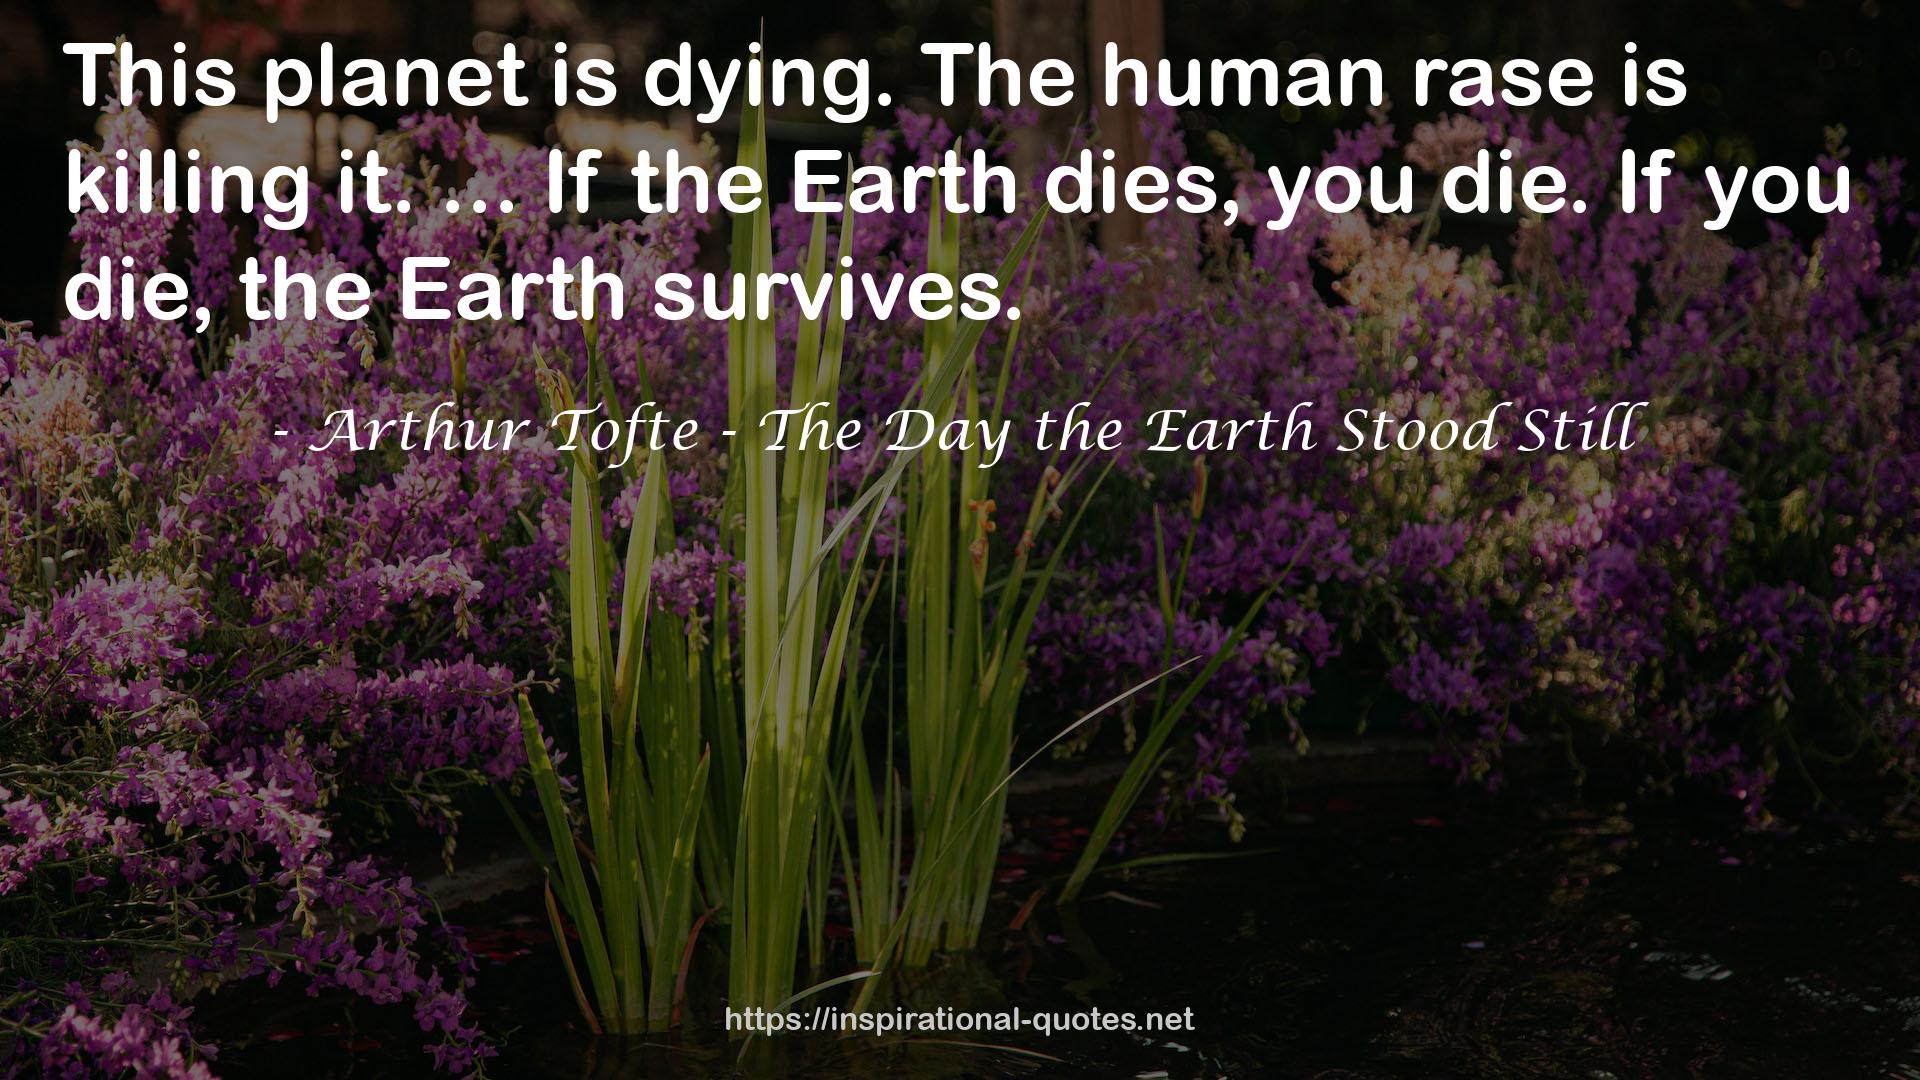 Arthur Tofte - The Day the Earth Stood Still QUOTES